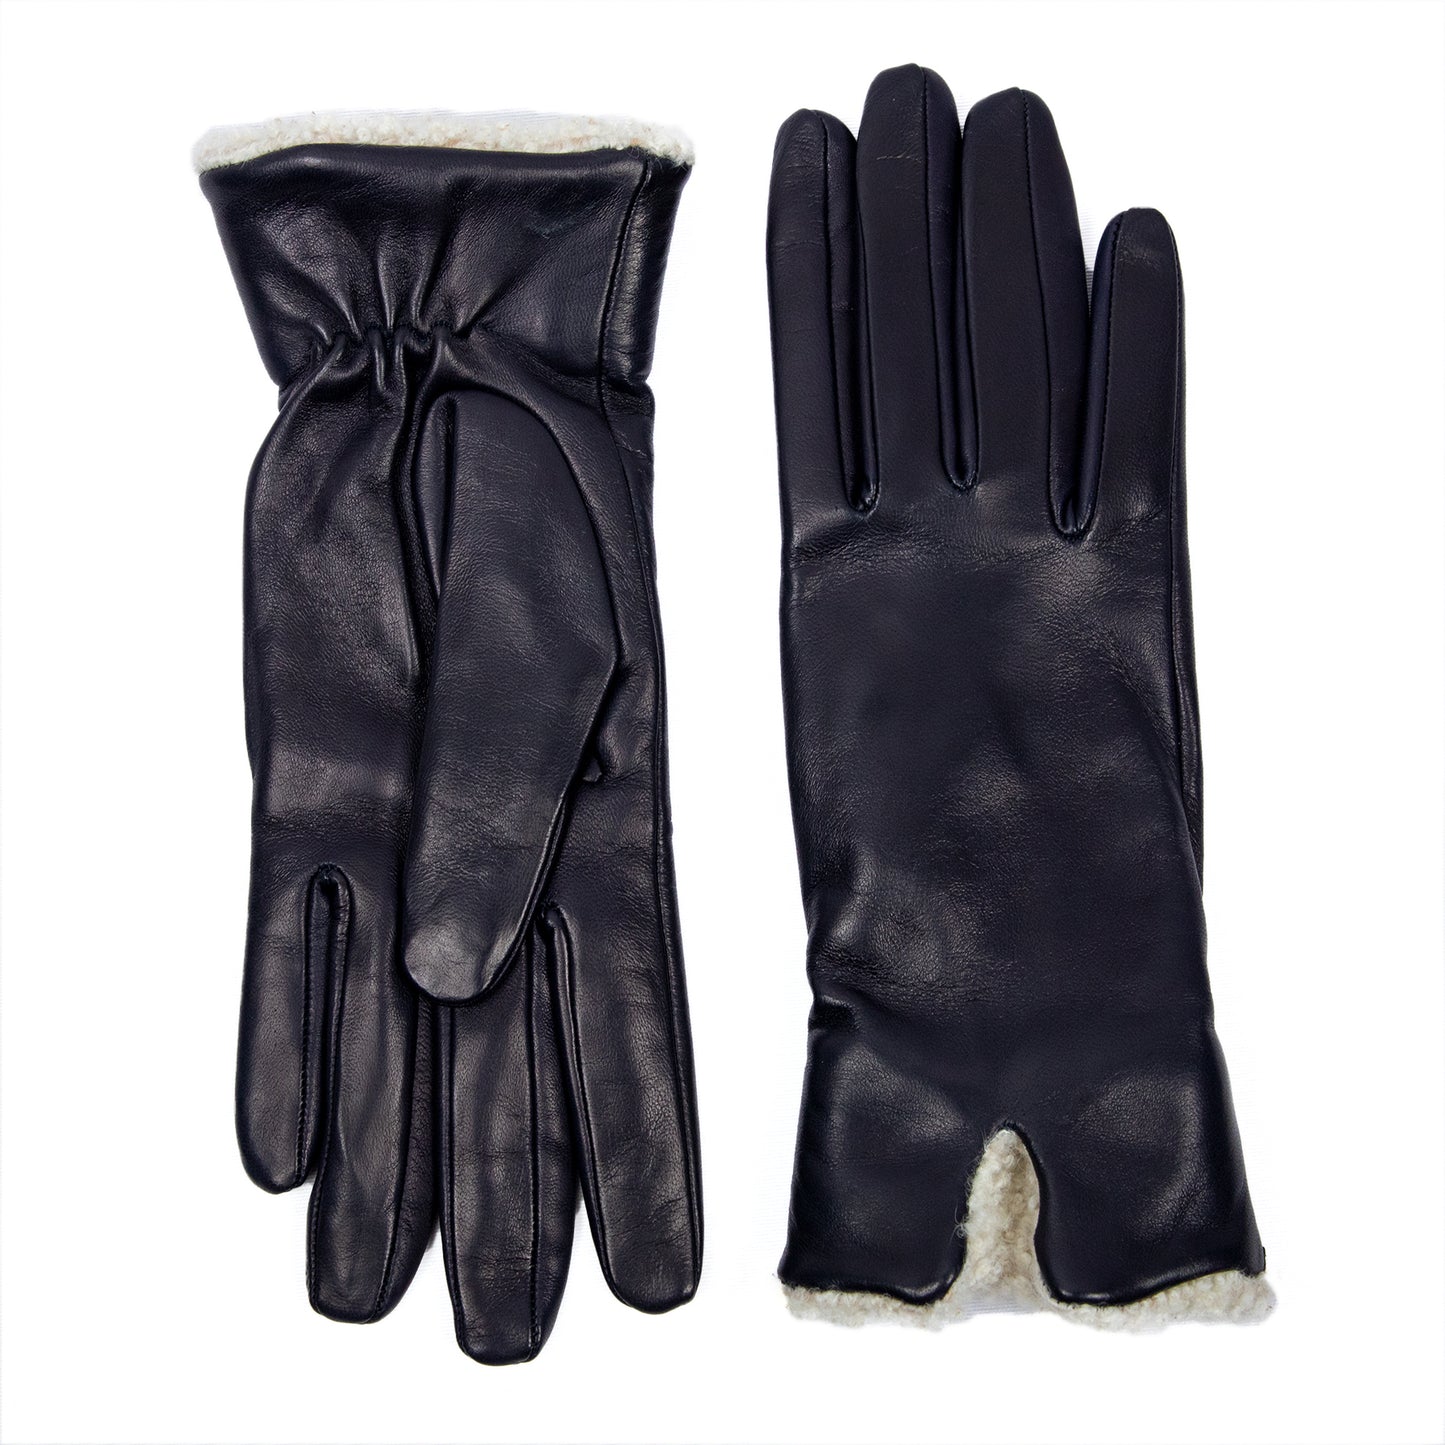 Women's blue nappa leather gloves with shearling cuff